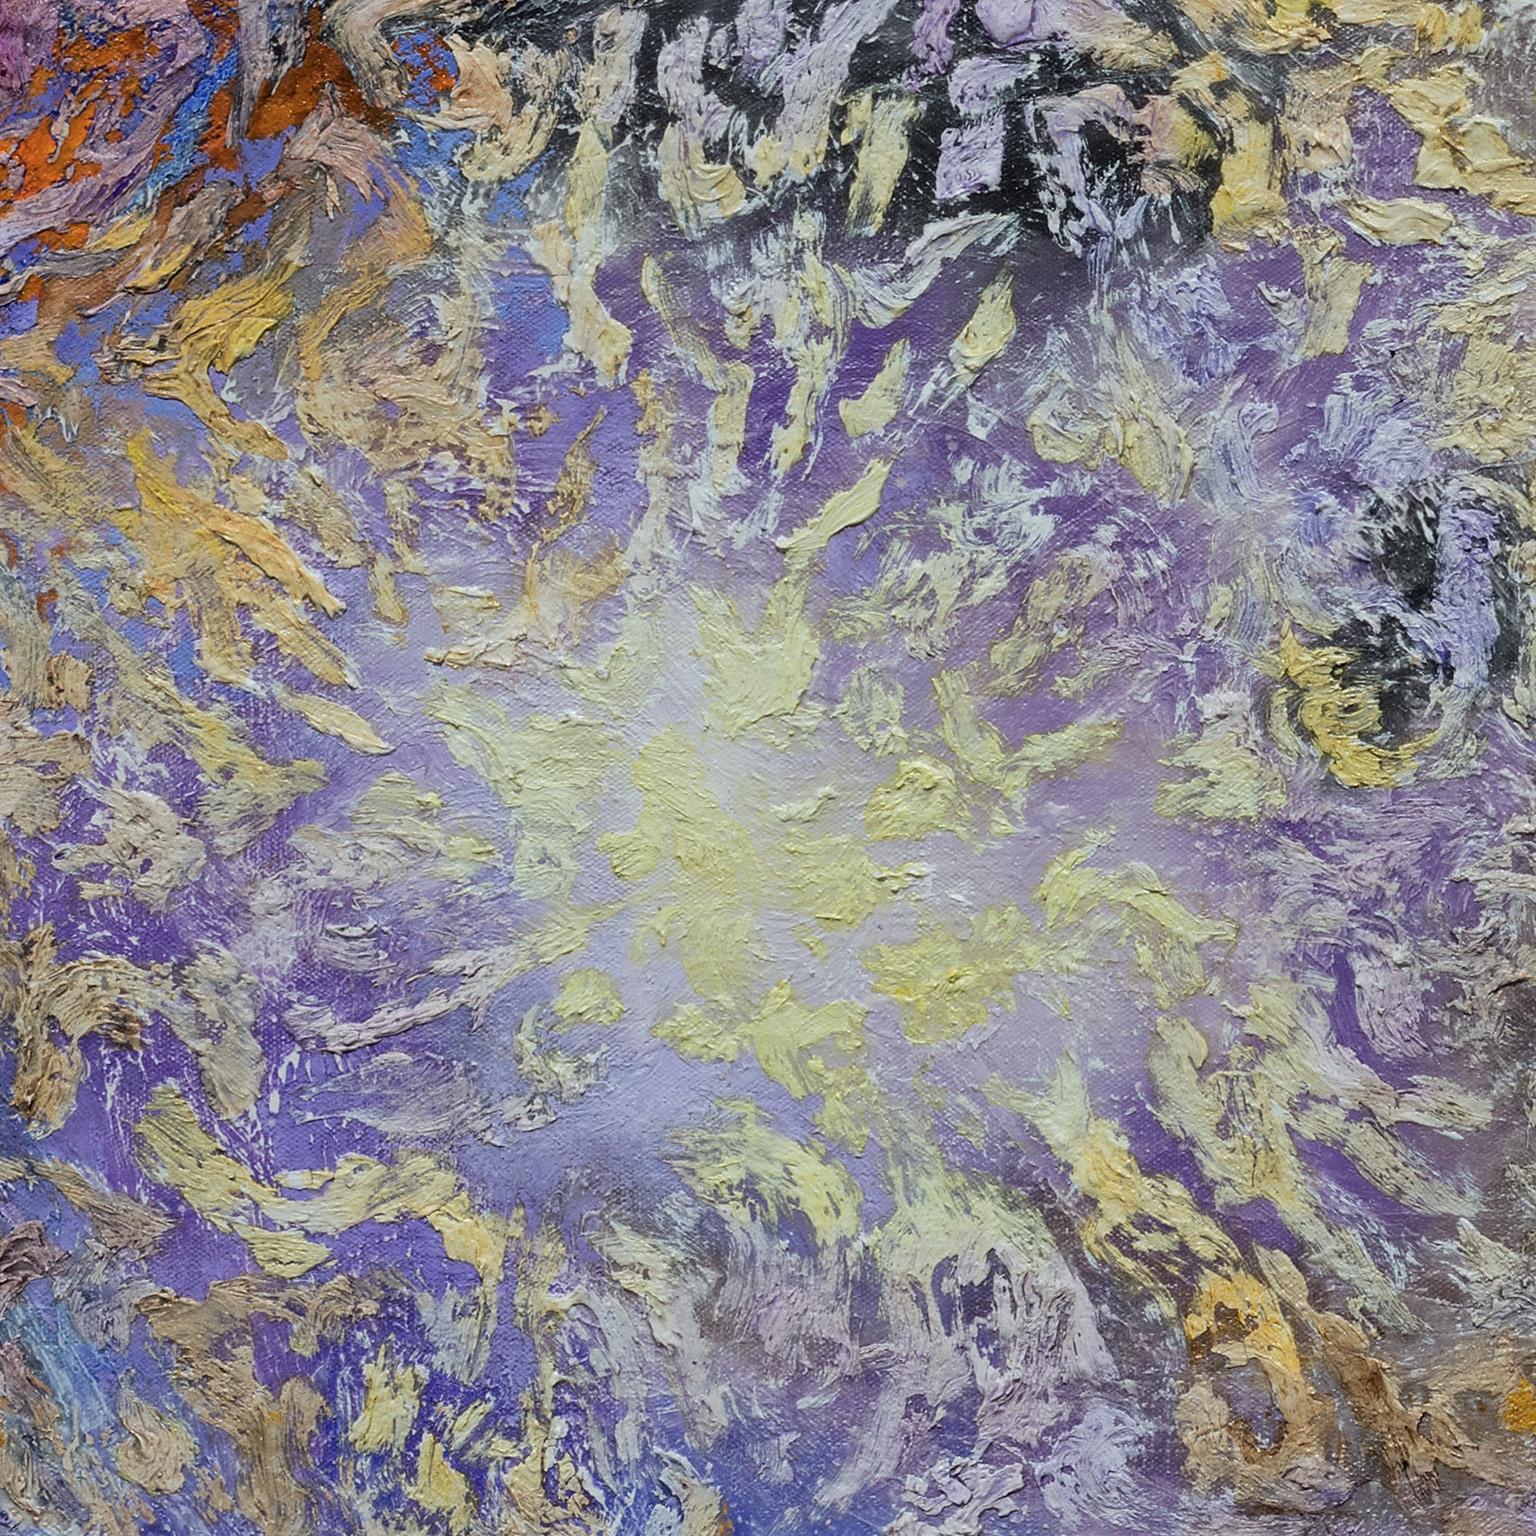 Conflicts - Abstract Expressionist Painting with Purple and Orange Colors For Sale 1